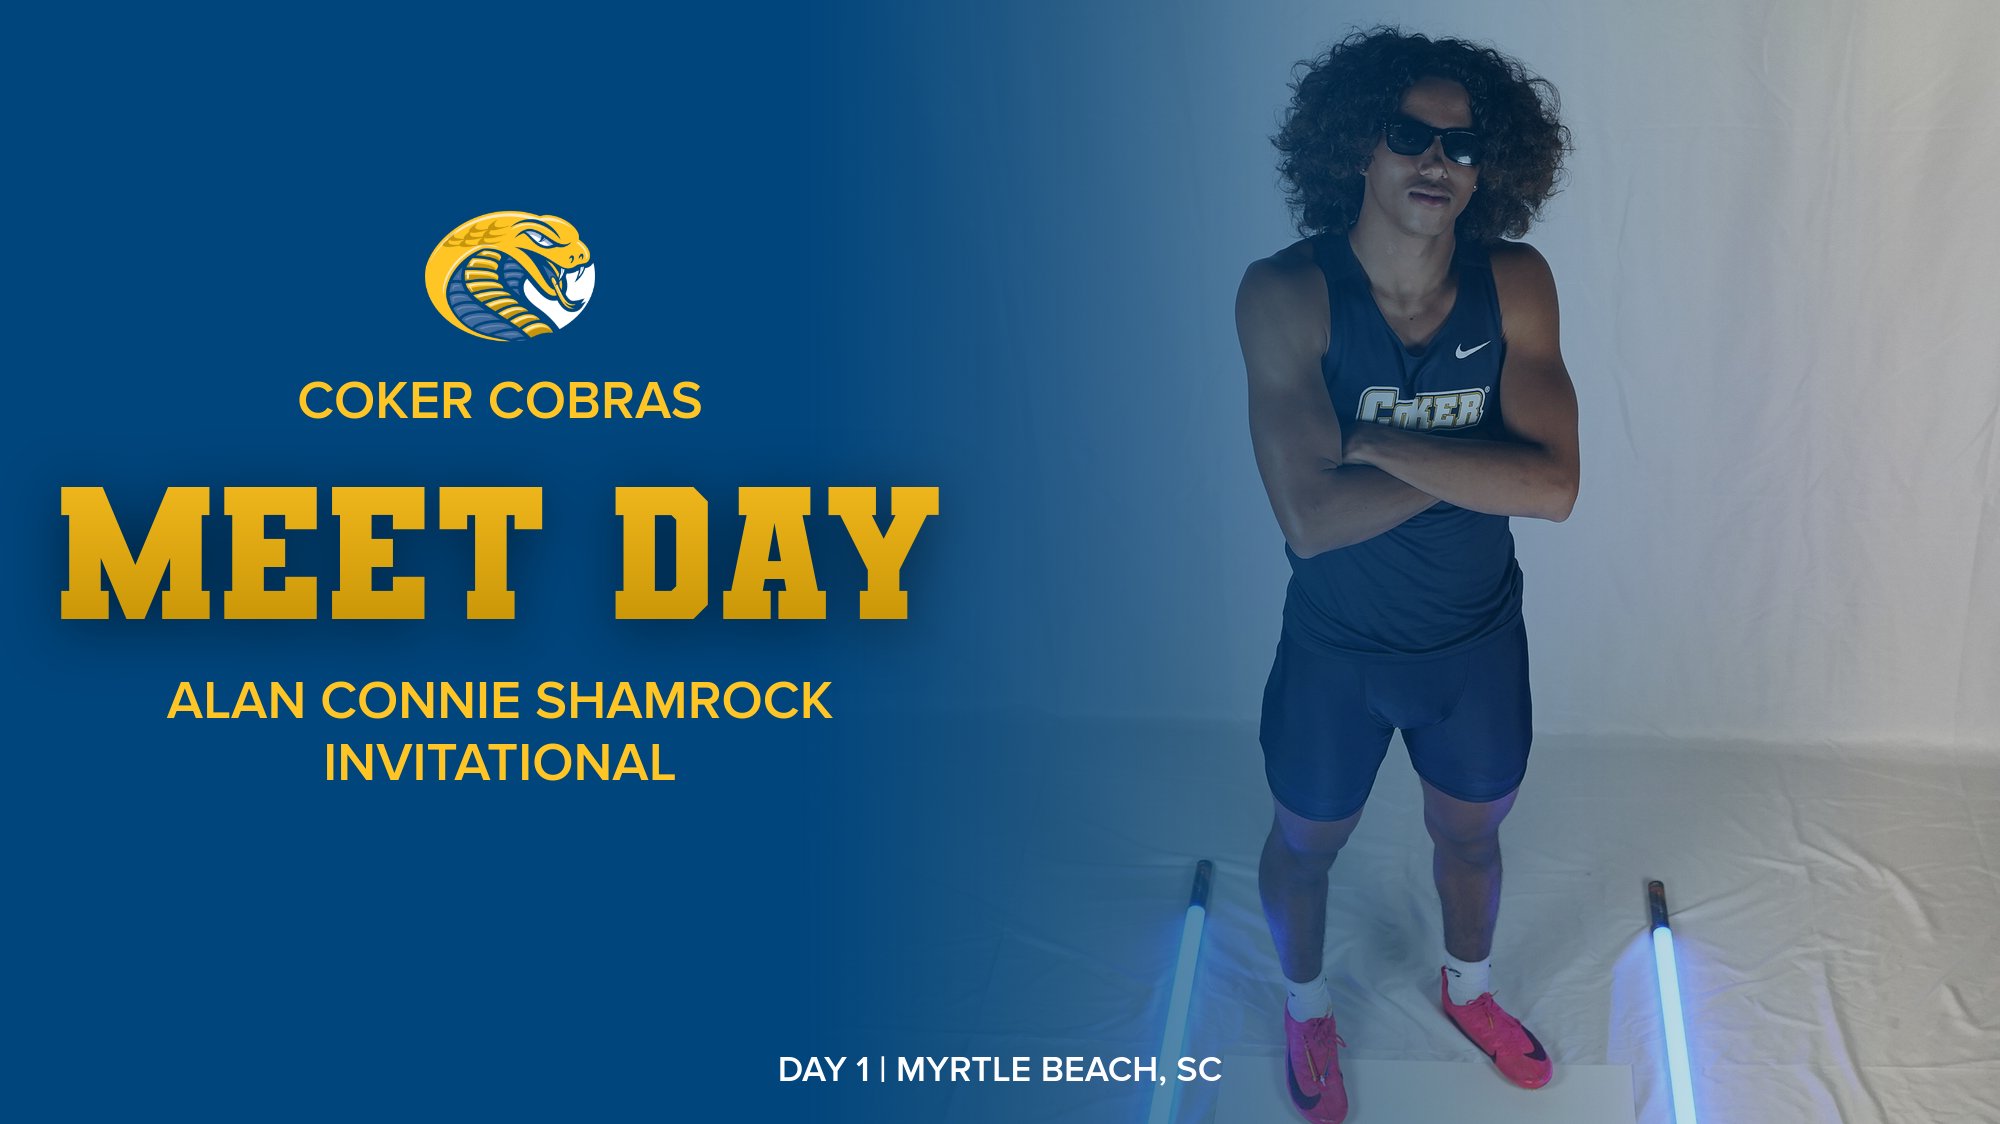 Cobras Get Four Top Ten Performances on Final Day of Alan Connie Shamrock Invitational